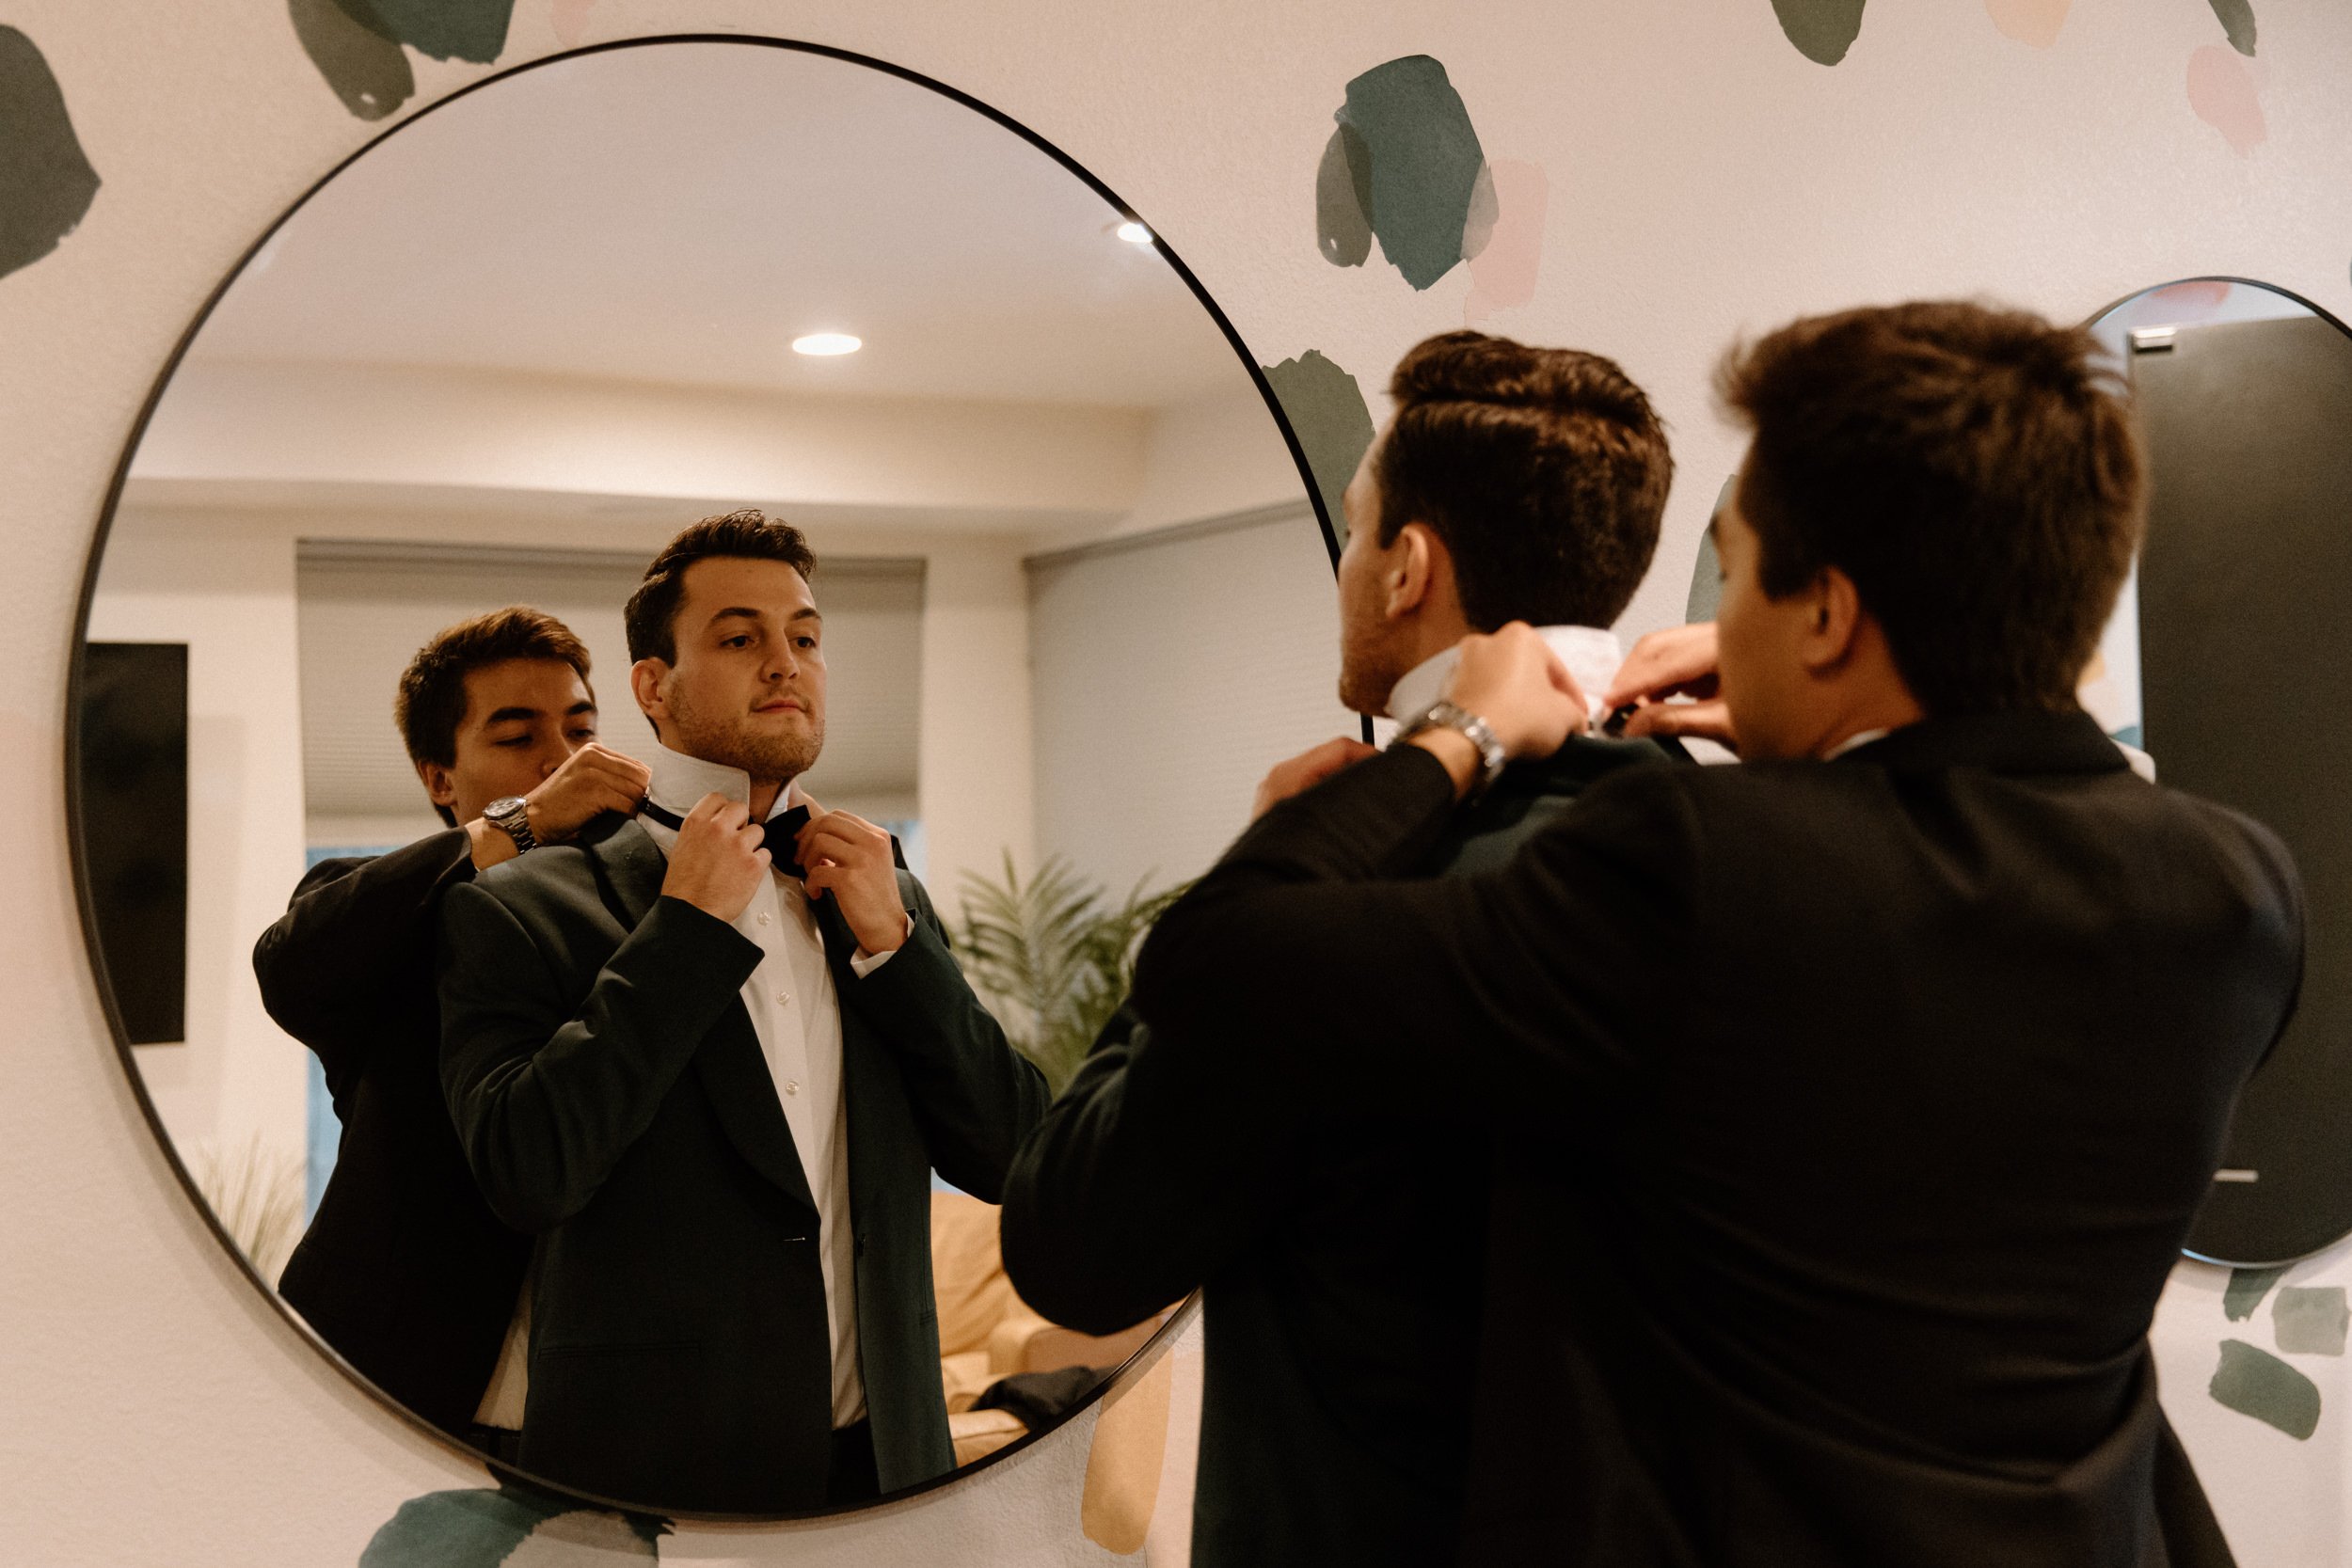 A groomsmen helps the groom with his bowtie